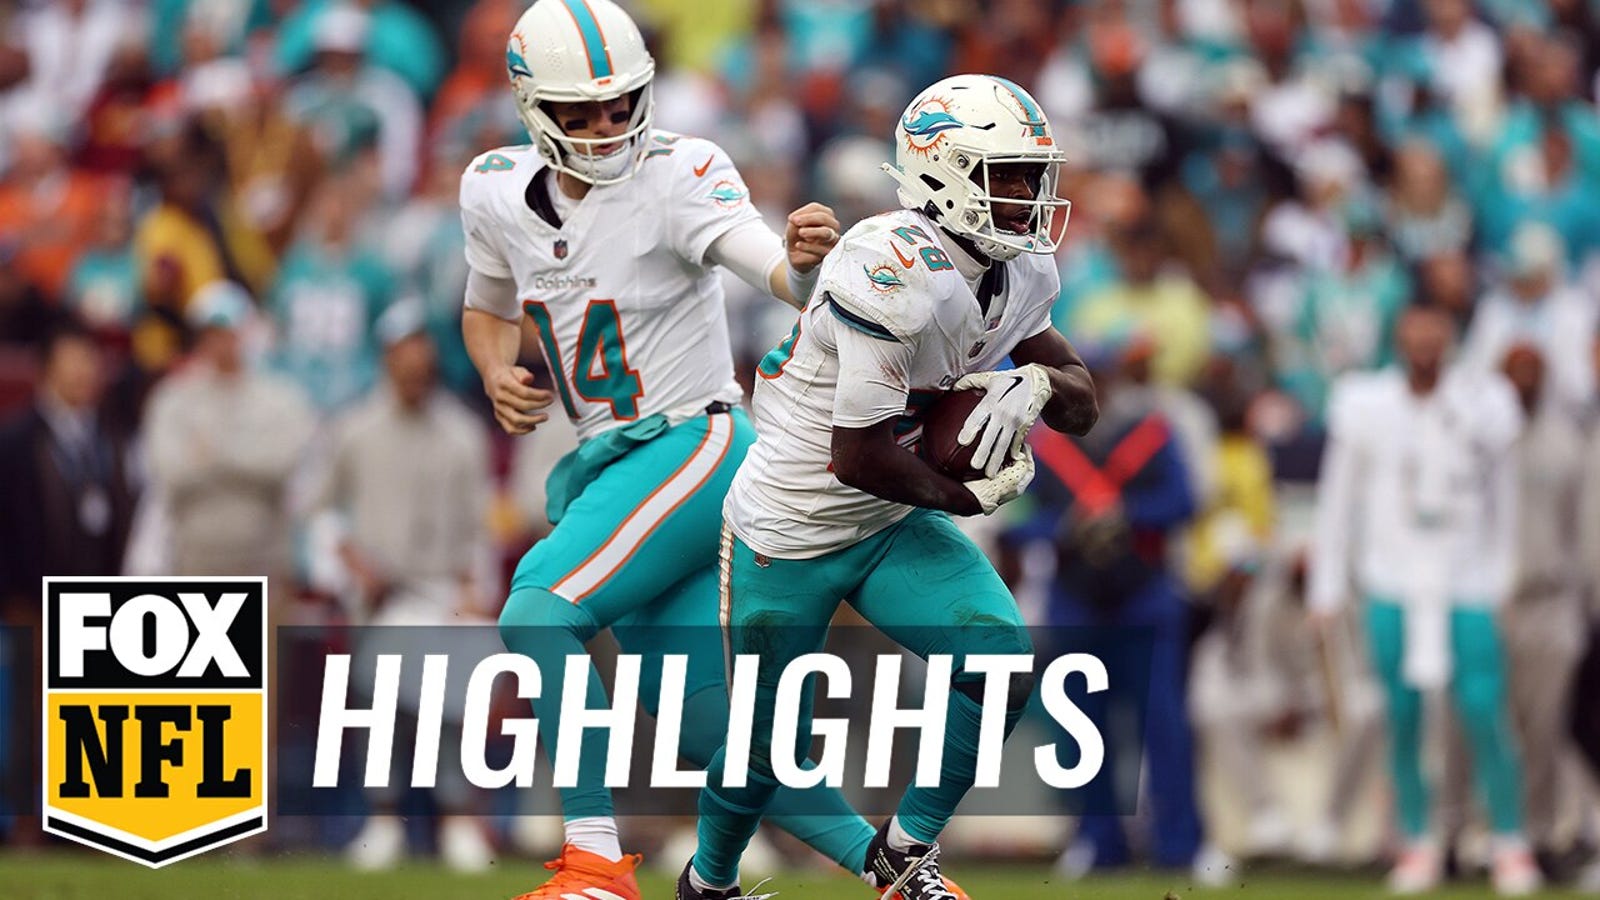 De'Von Achane's two rushing touchdowns help carry Dolphins to dominant 45-15 victory against Commanders